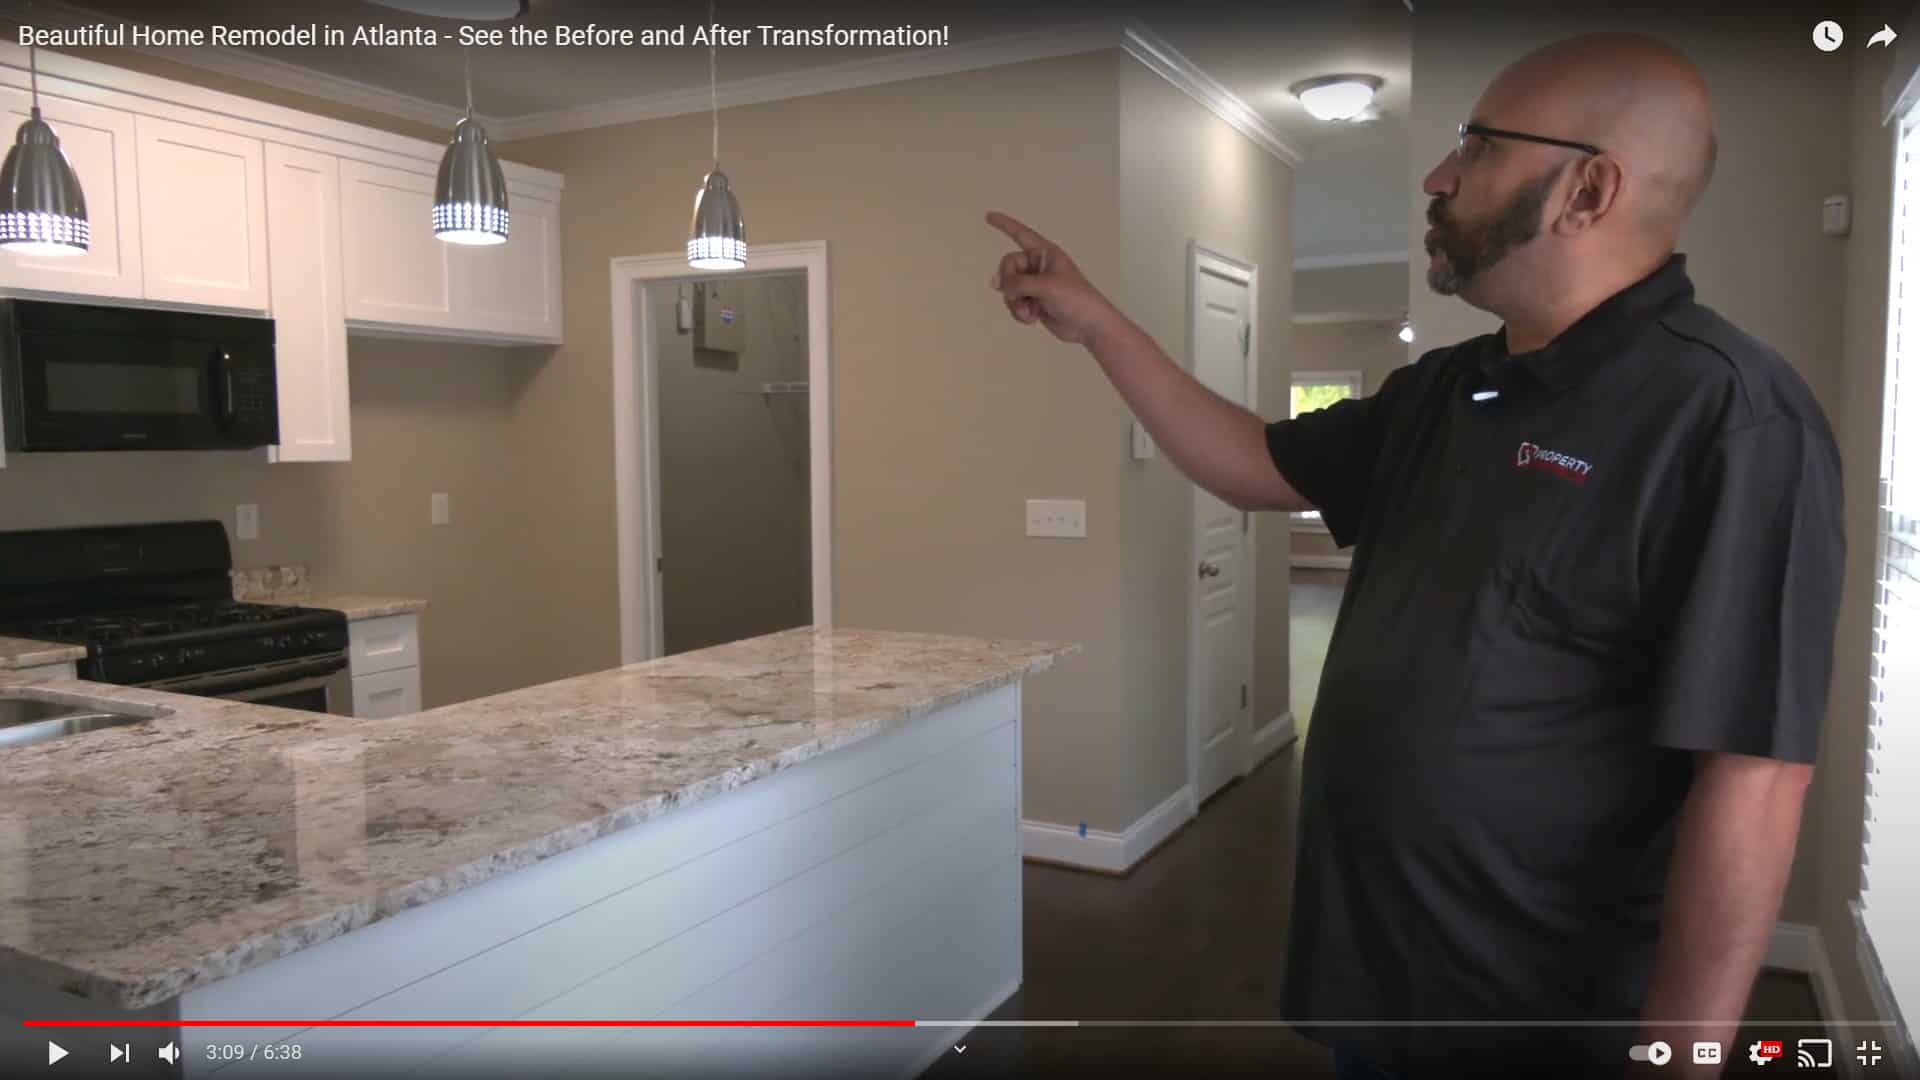 watch-this-home-remodeling-transformation-in-atlanta